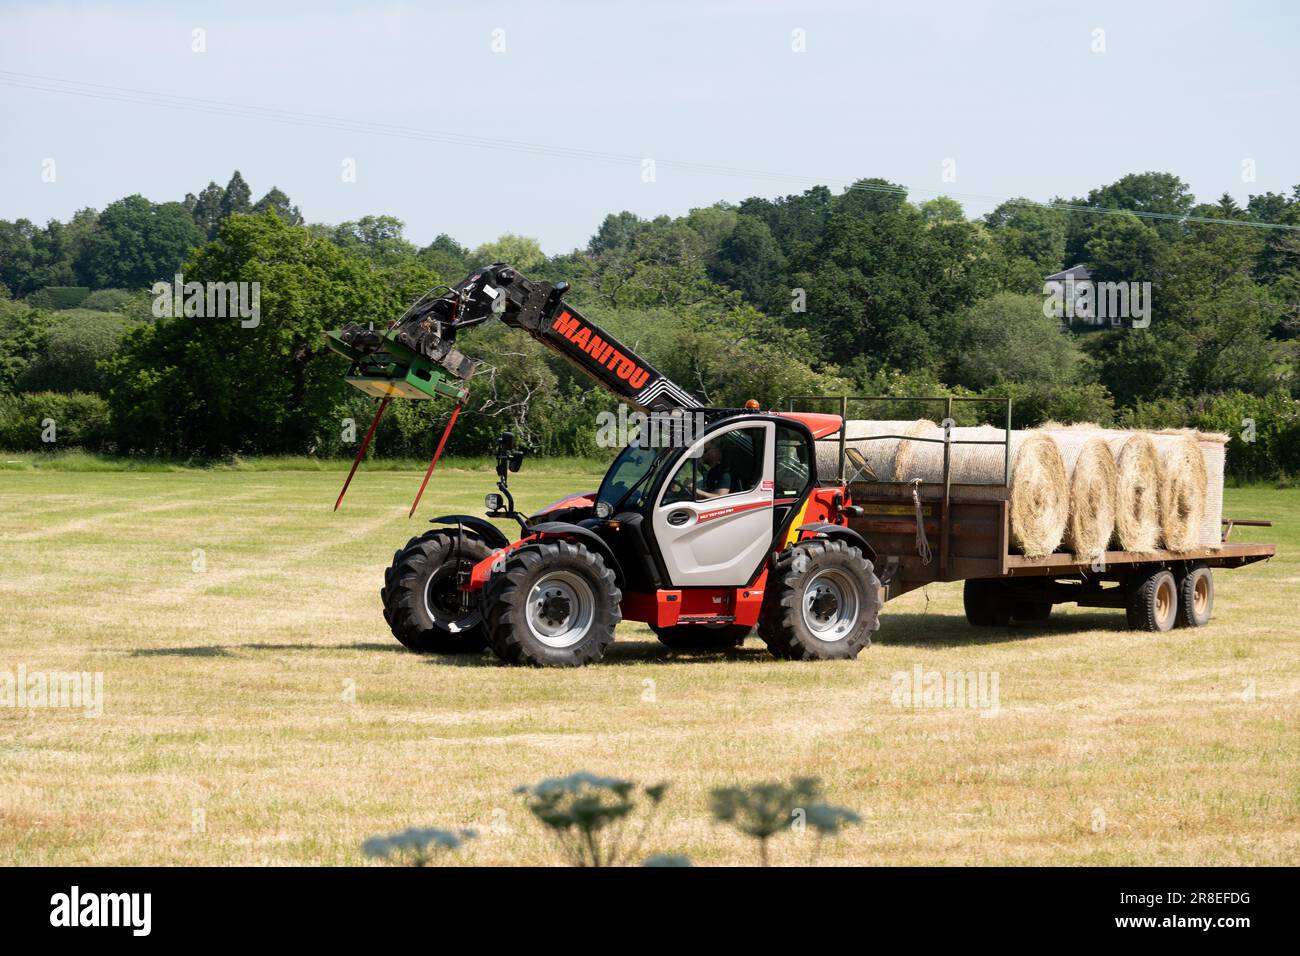 Manitou tractor pulling a trailer of hay bales, Warwickshire, UK Stock Photo